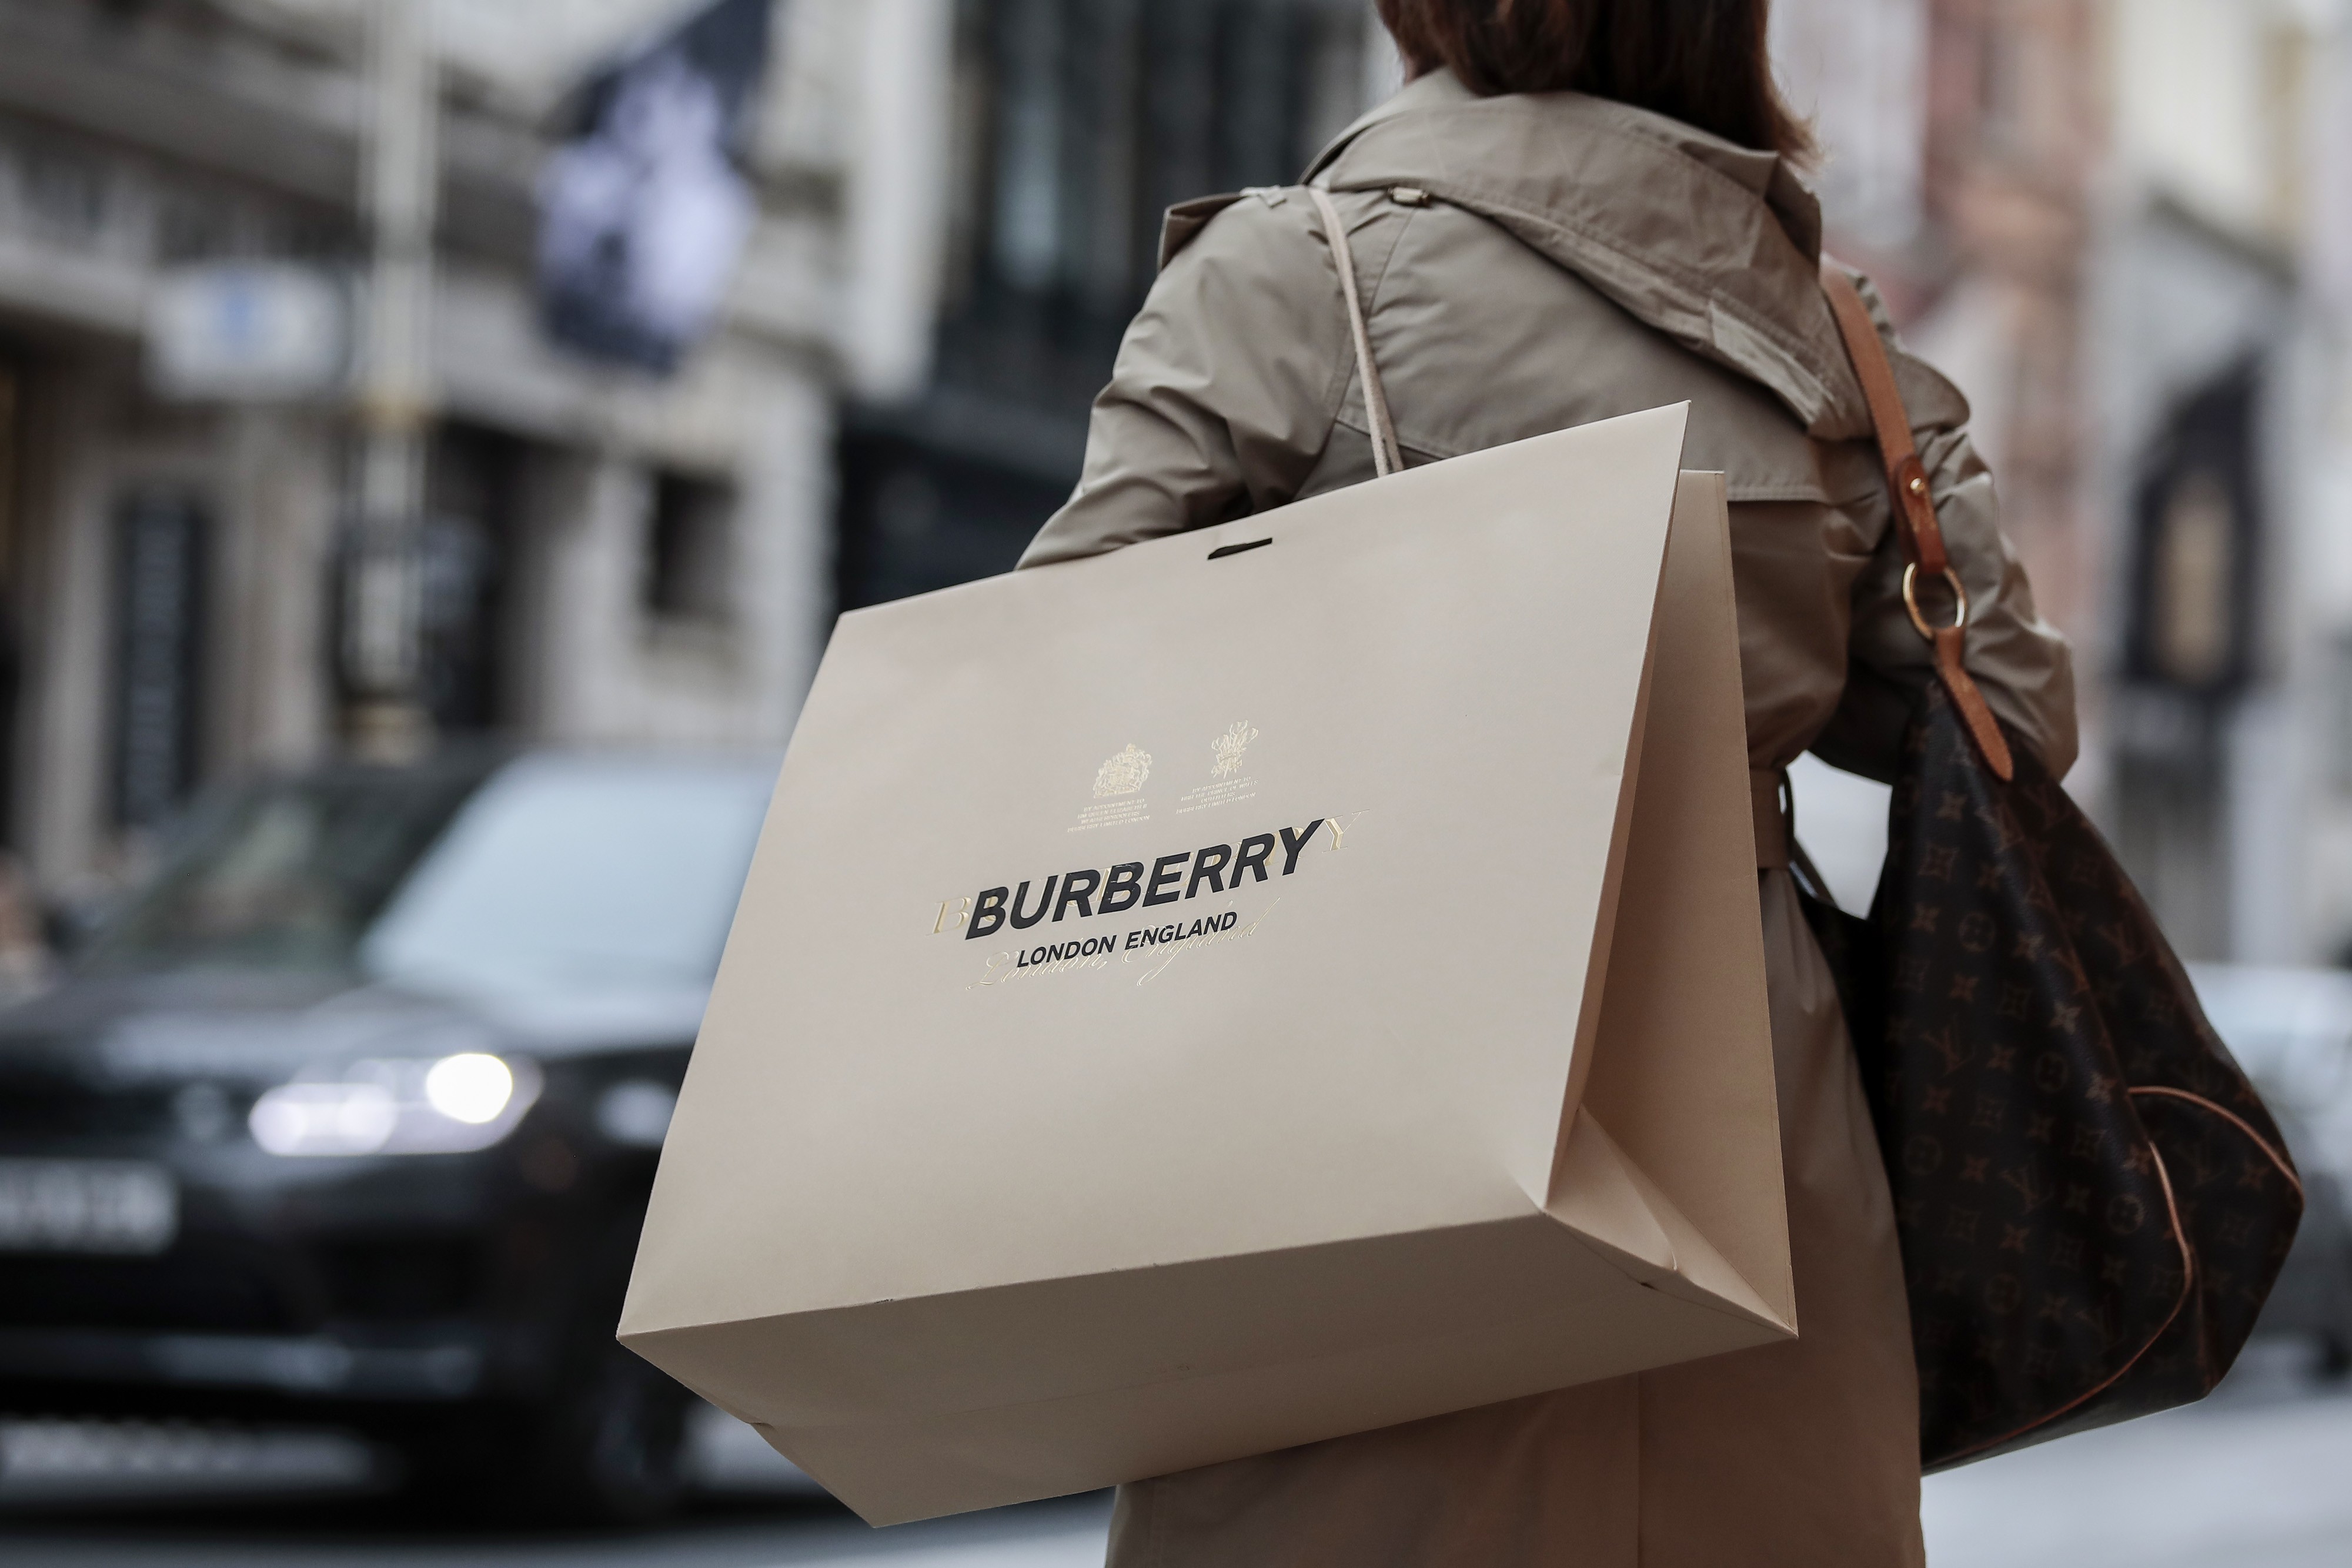 Burberry’s strategy of targeting tech savvy Asian consumers is paying rich dividends. Photo: Bloomberg